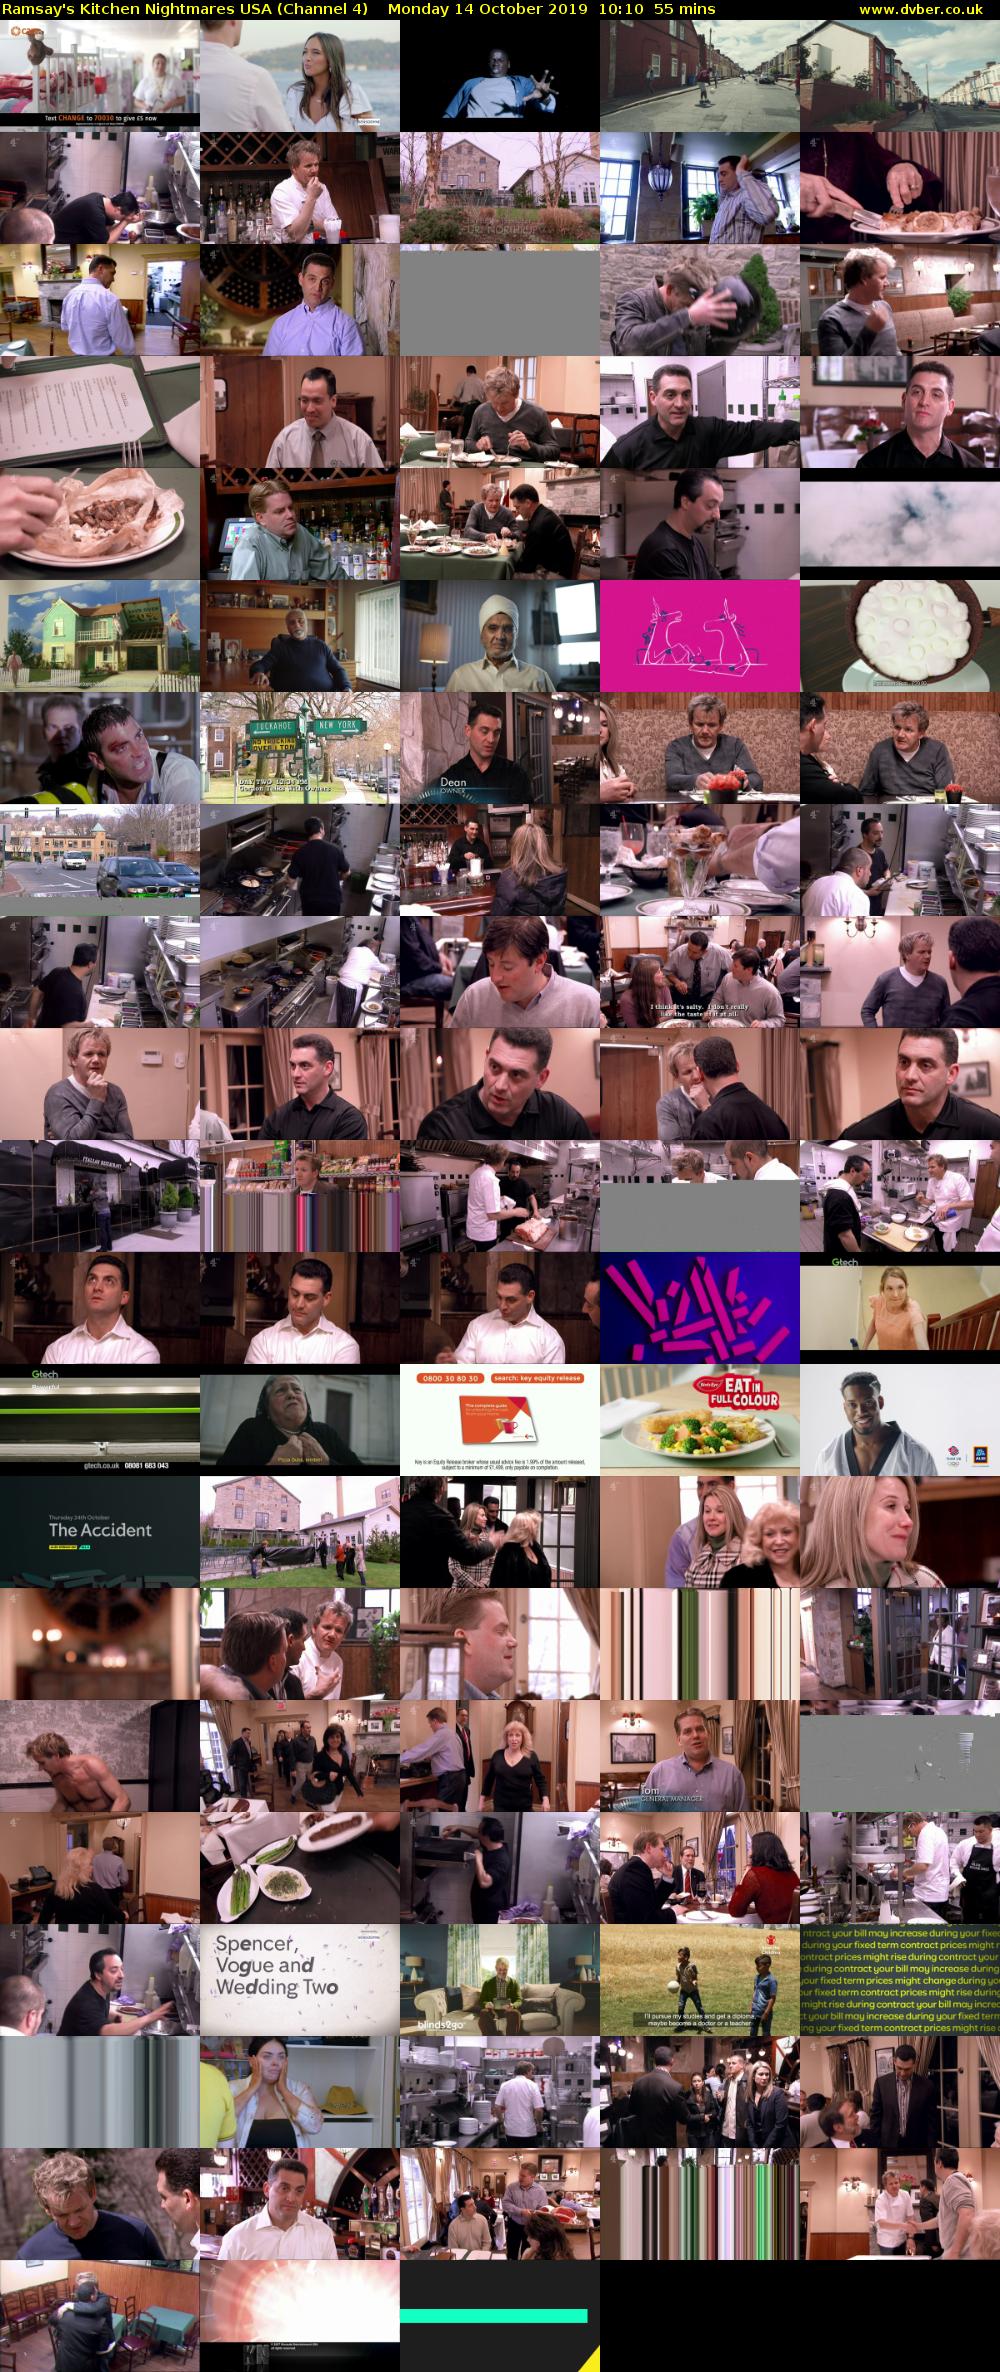 Ramsay's Kitchen Nightmares USA (Channel 4) Monday 14 October 2019 10:10 - 11:05